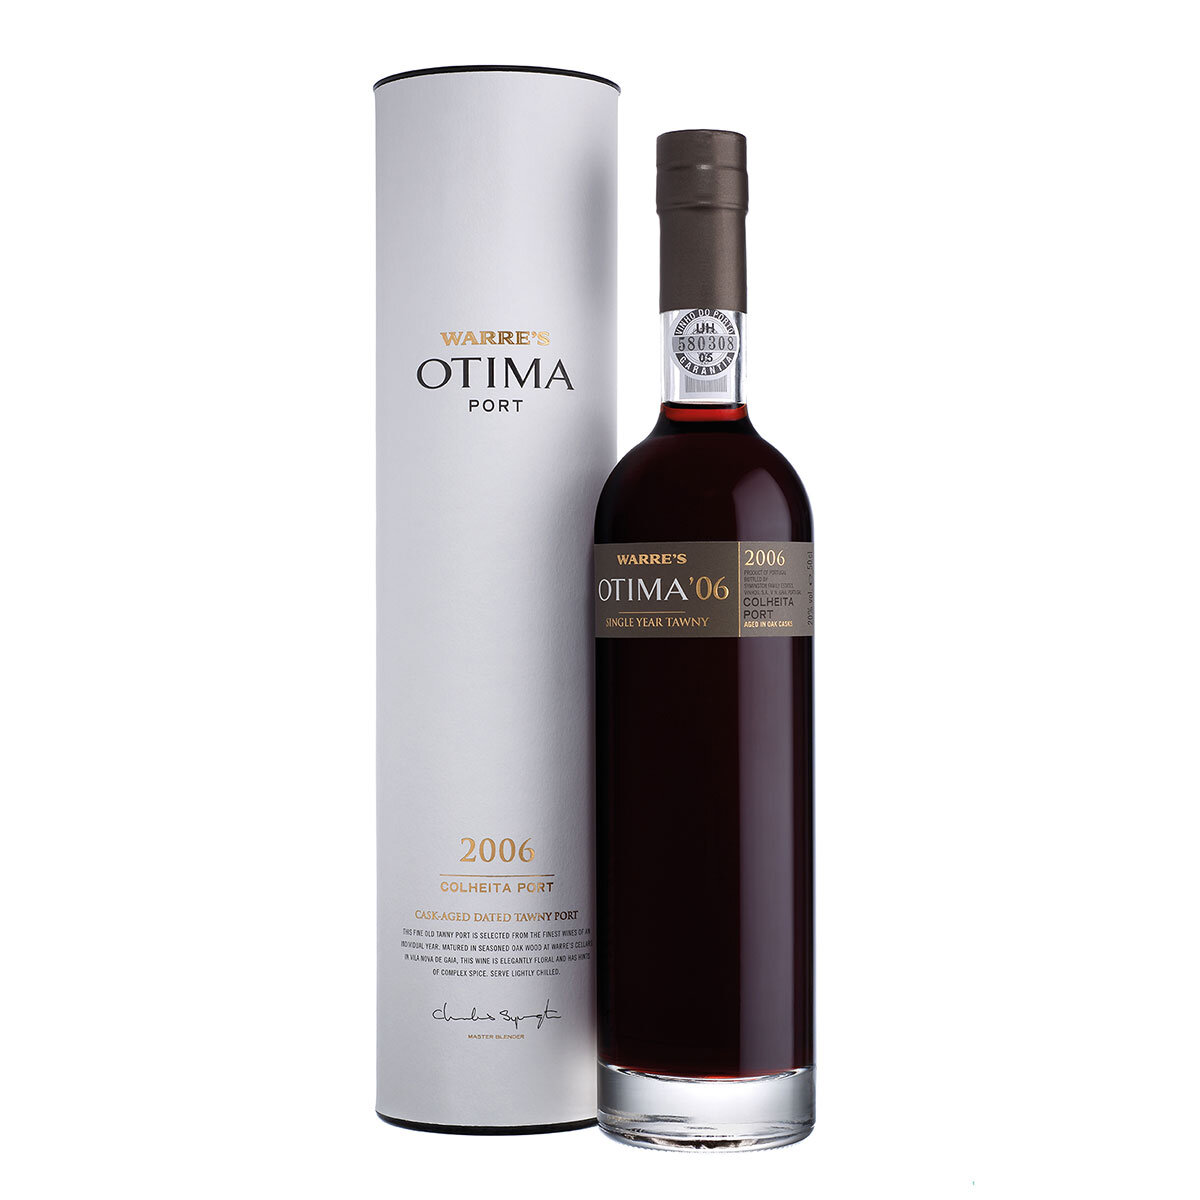 Warre's Otima Colheita 2006 Cask-aged Dated Tawny Port with Tube